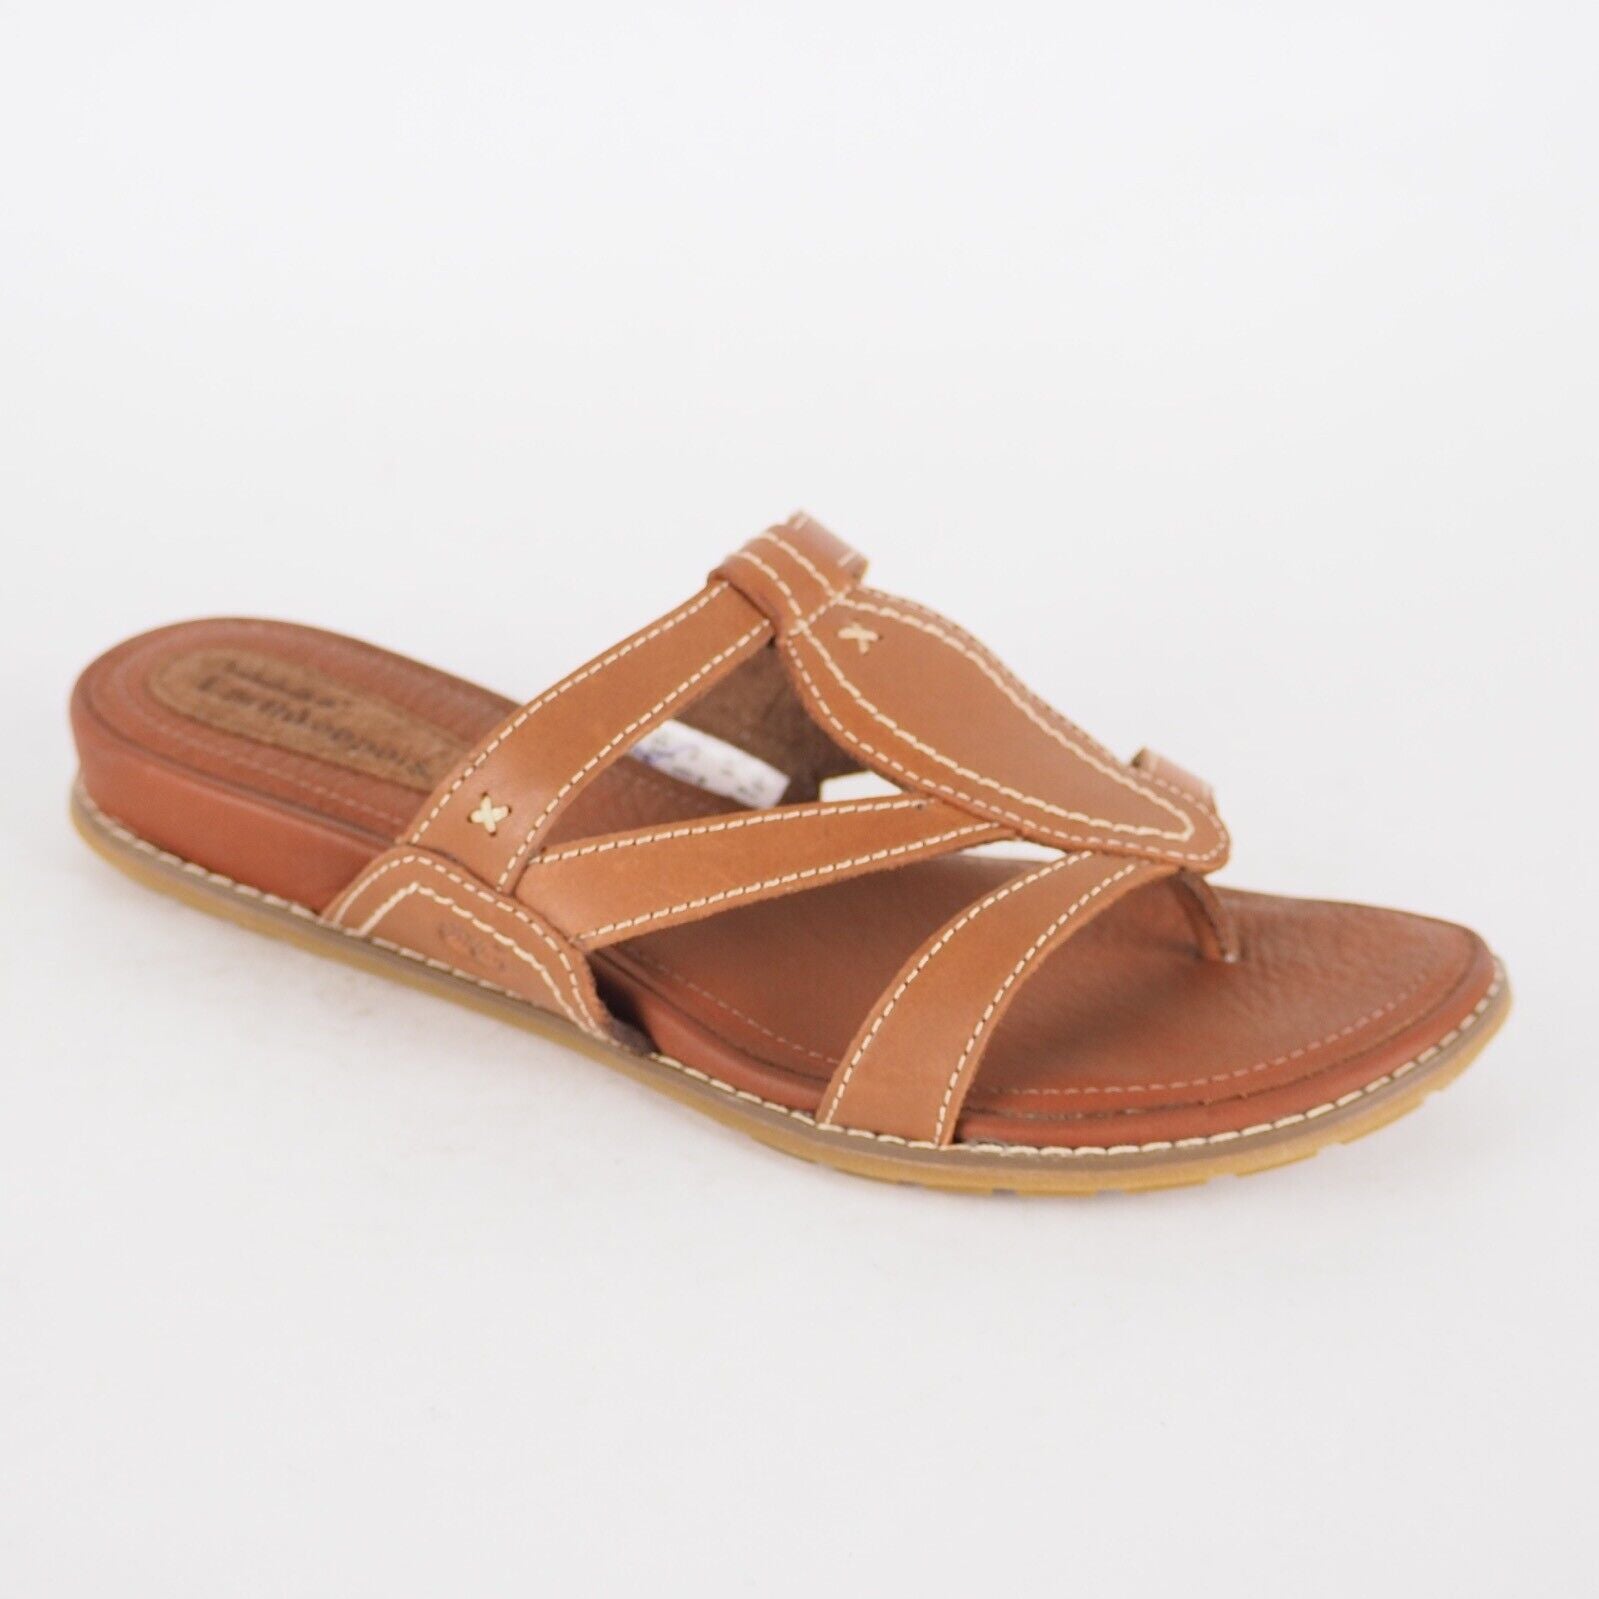 Womens Timberland 8037R Brown Leather Slips On Sandals Summer Holiday Flip Flop